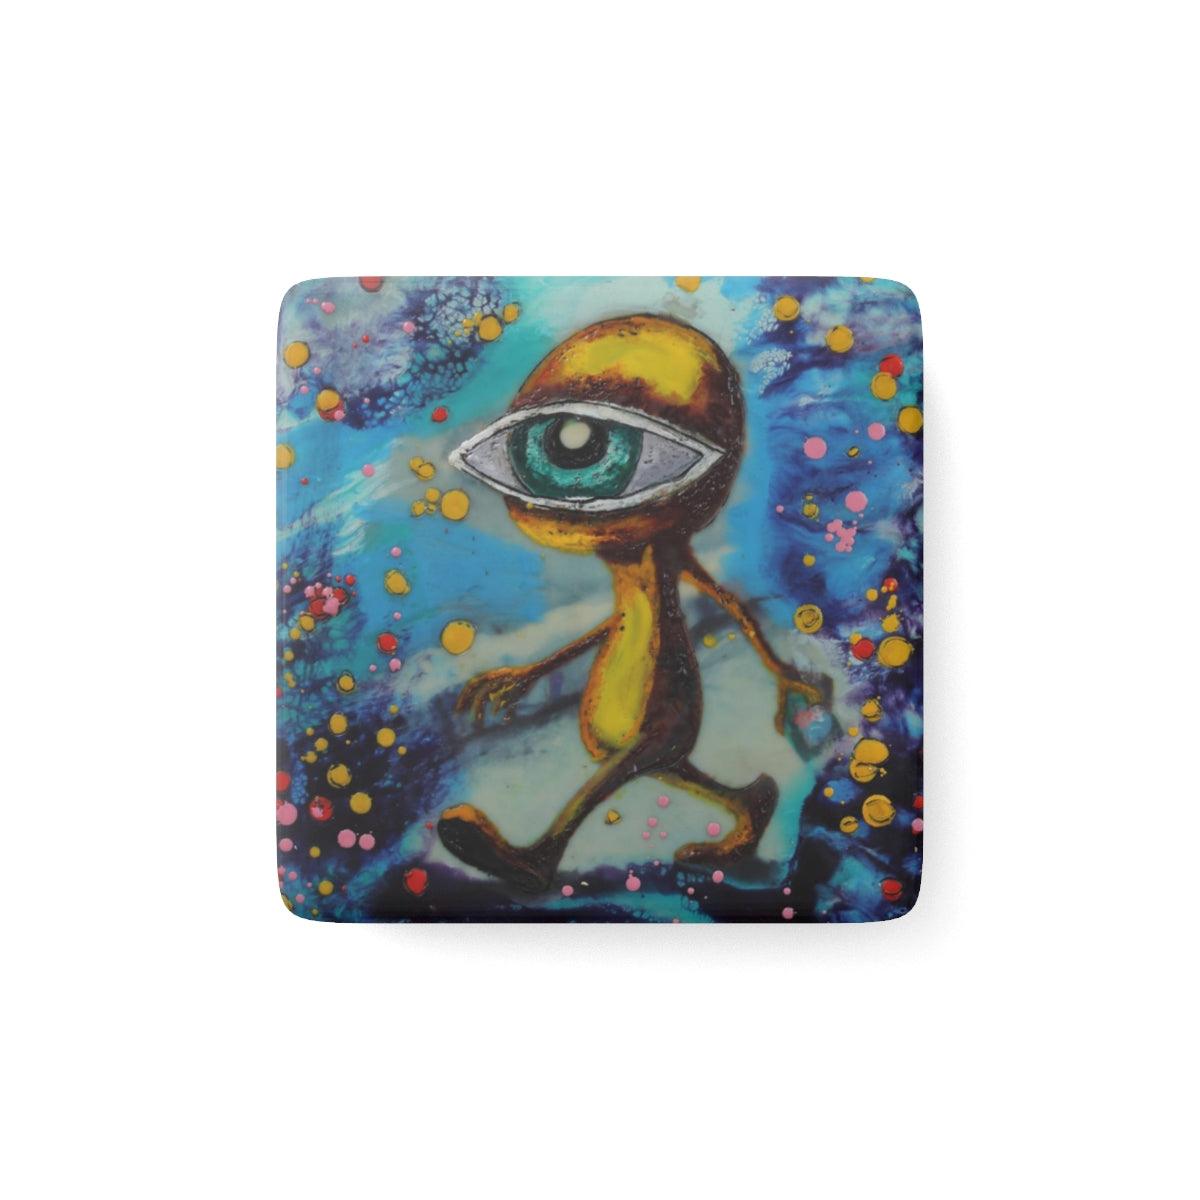 "I Took The Red Pill" Porcelain Magnet, Square-Home Decor - Mike Giannella - Encaustic Painting - Mixed Media Artist - Art Prints